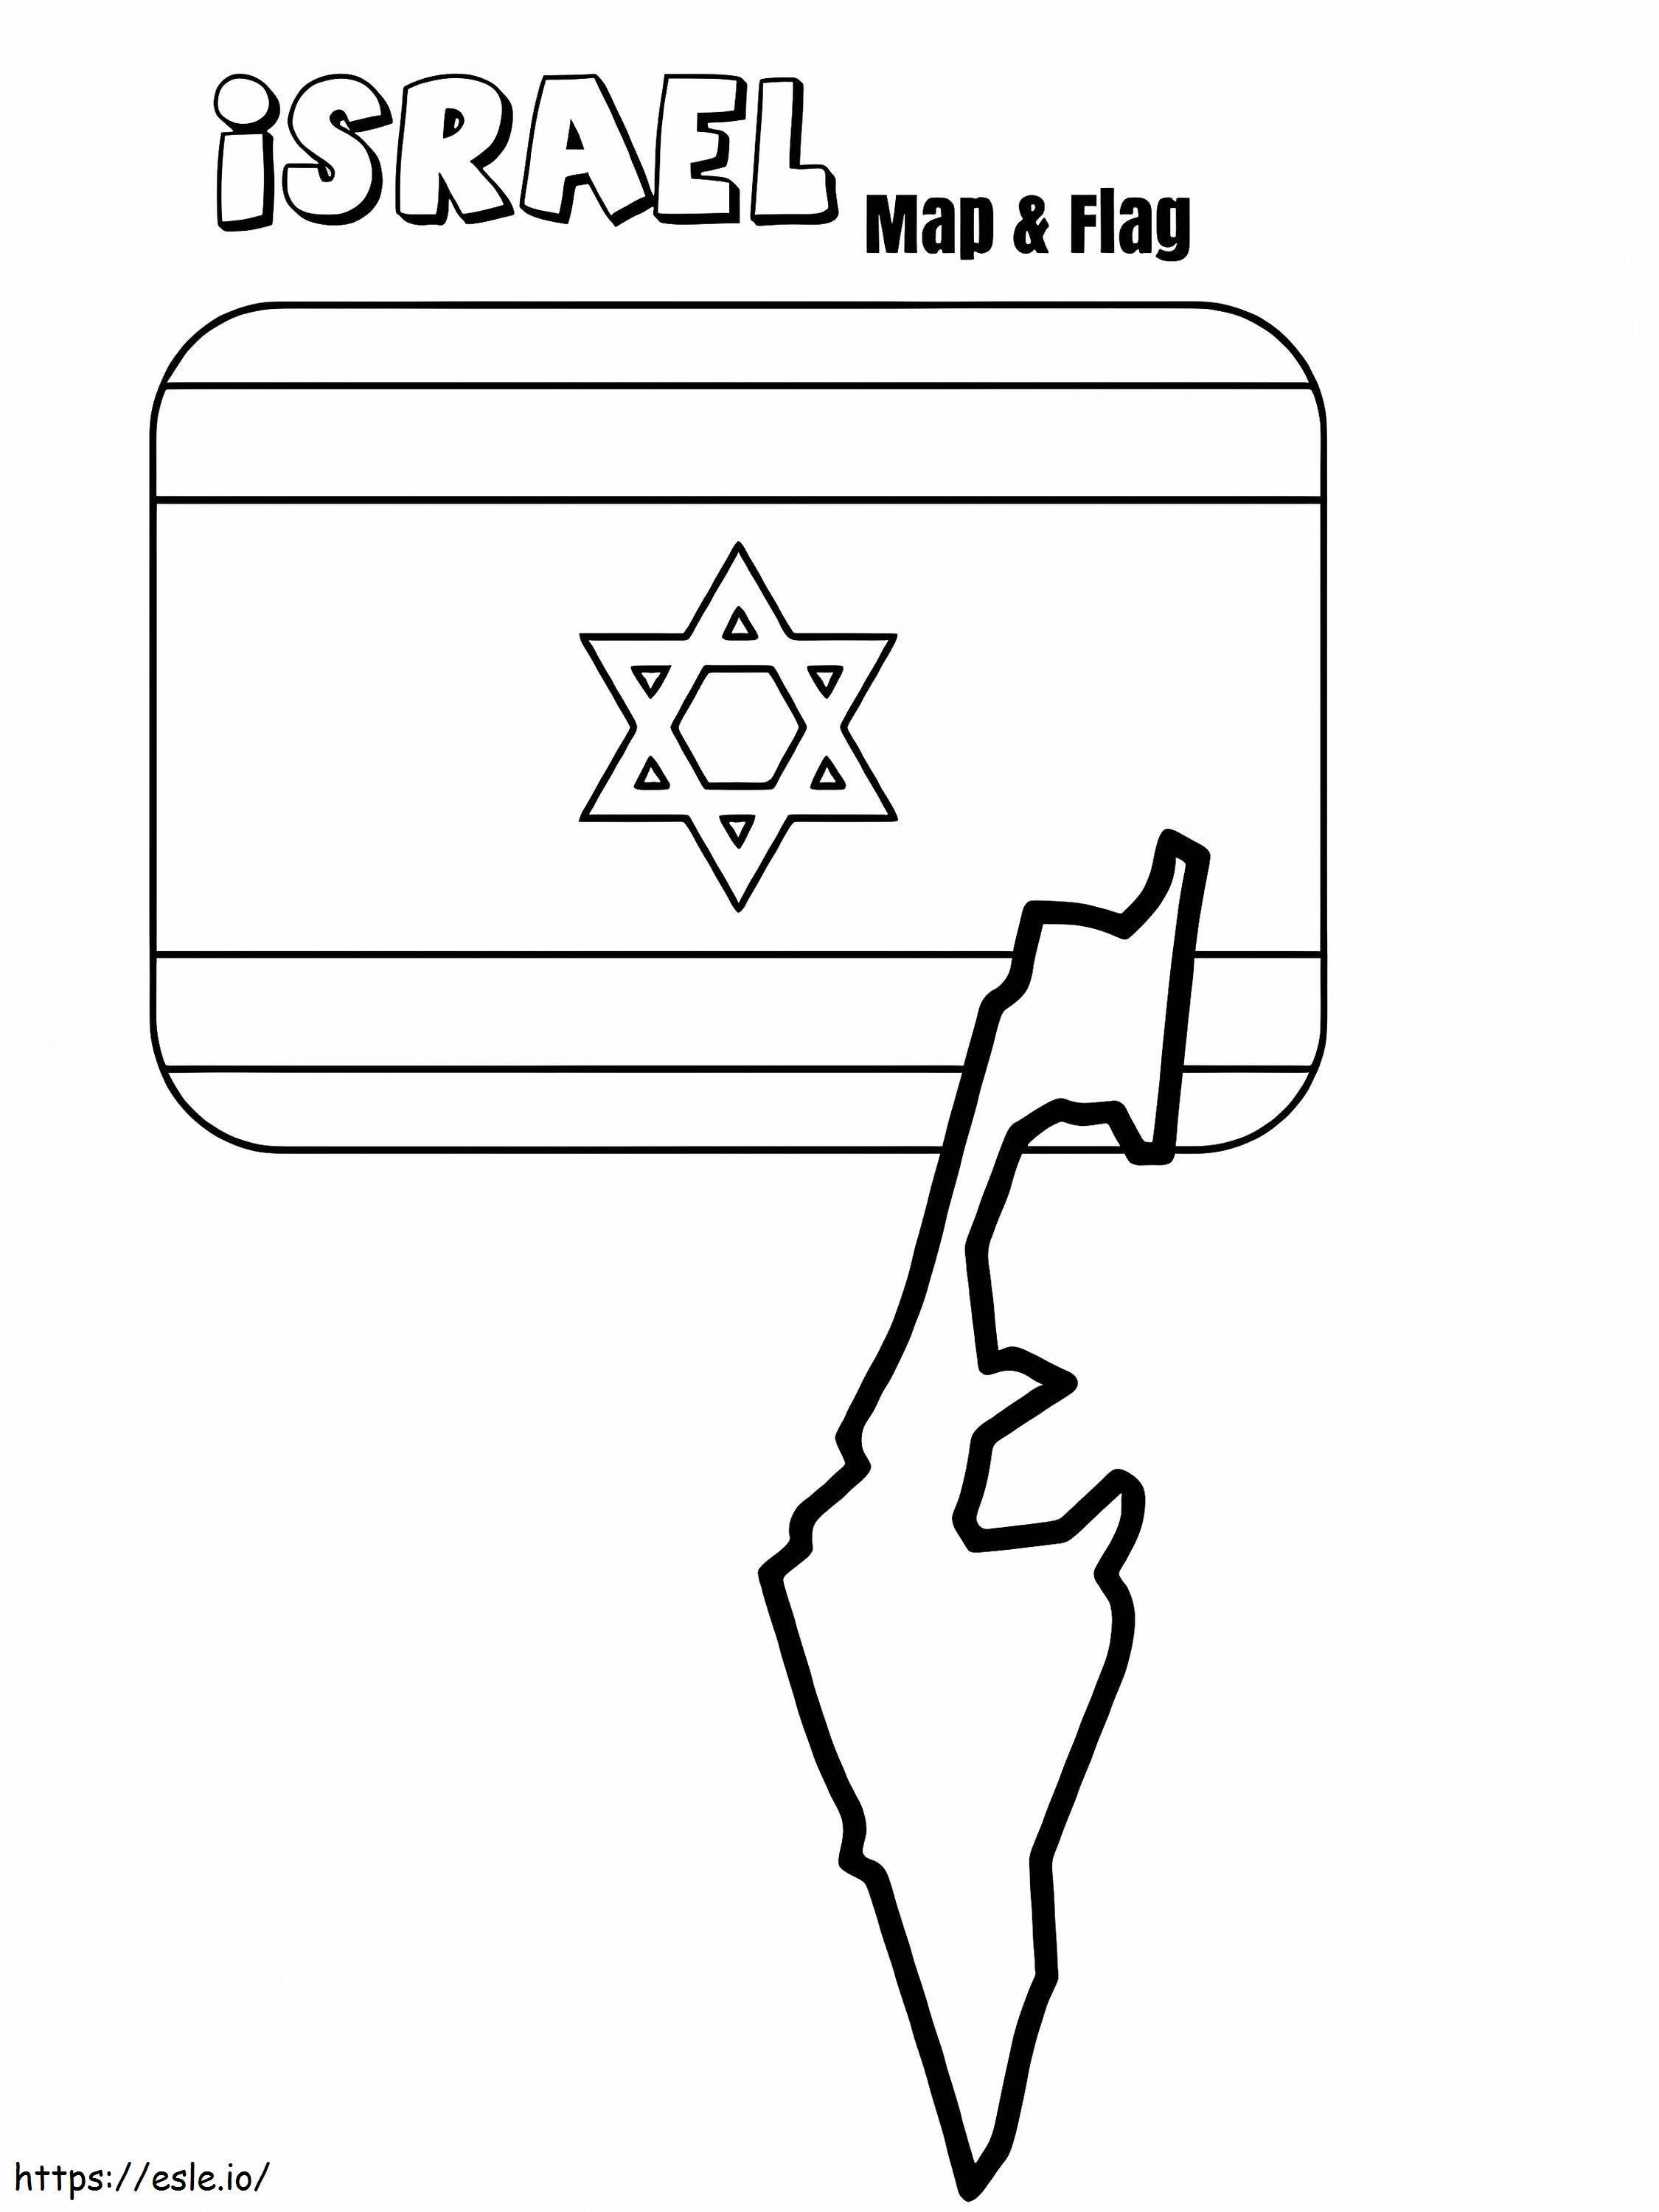 Israel Map And Flag coloring page